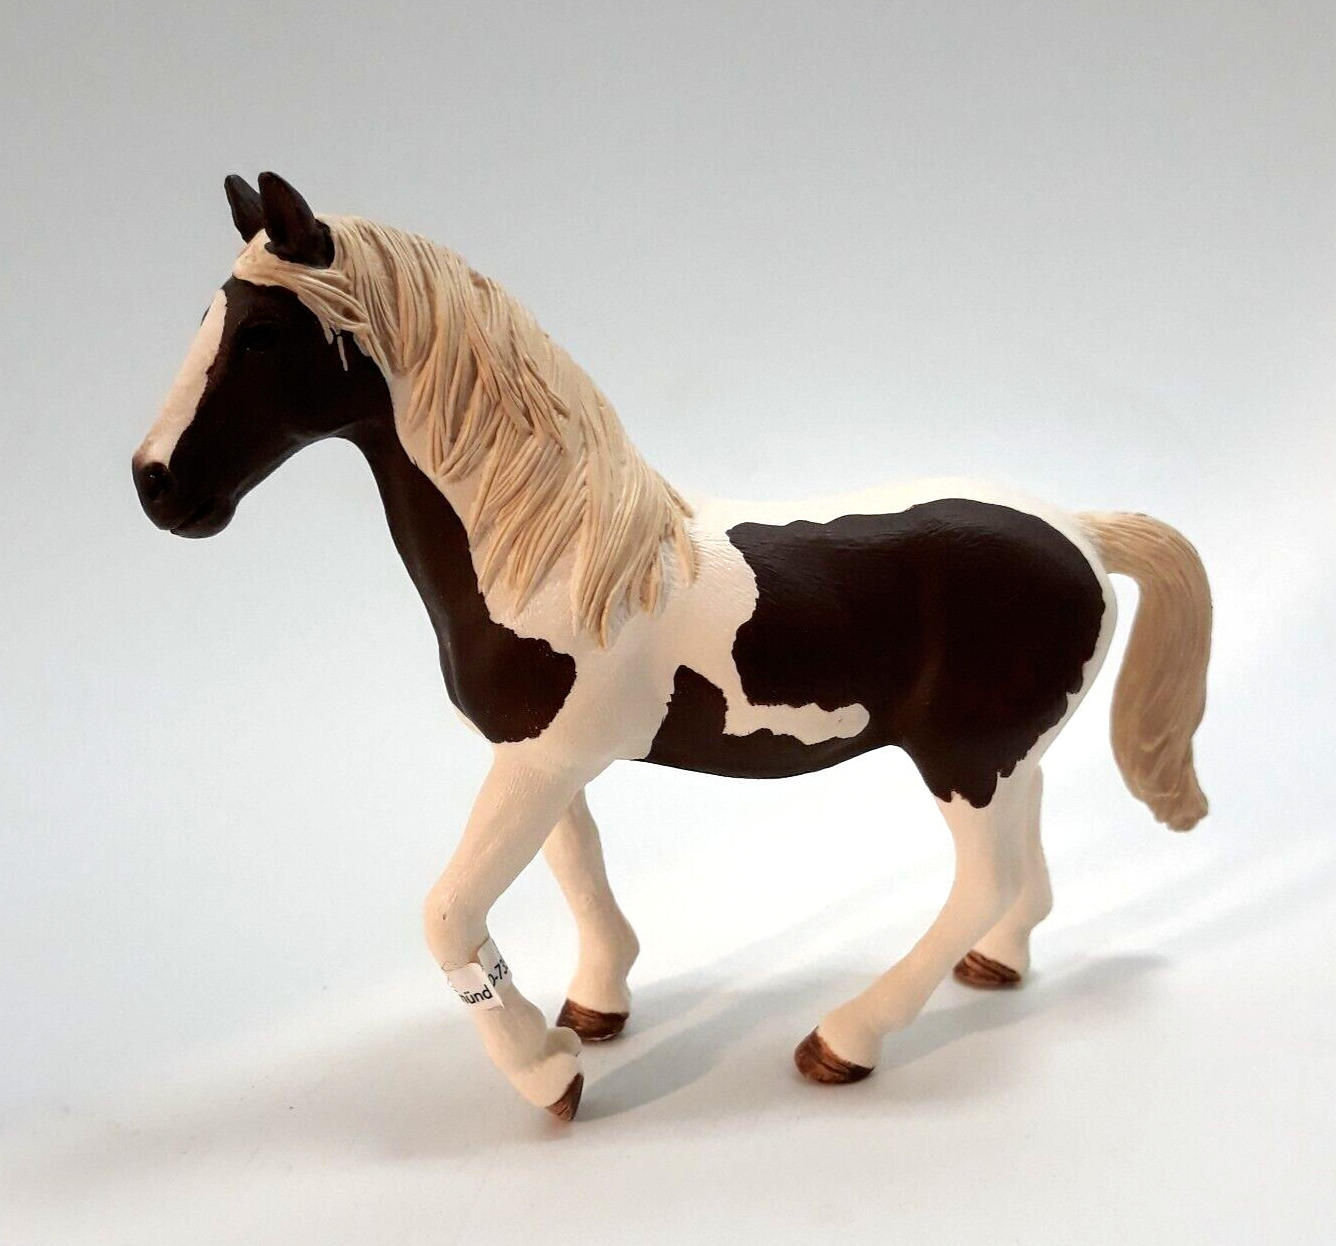 Schleich Am Limes 69 Retired Pinto Mare Brown White Horse Figure D-73527 2016